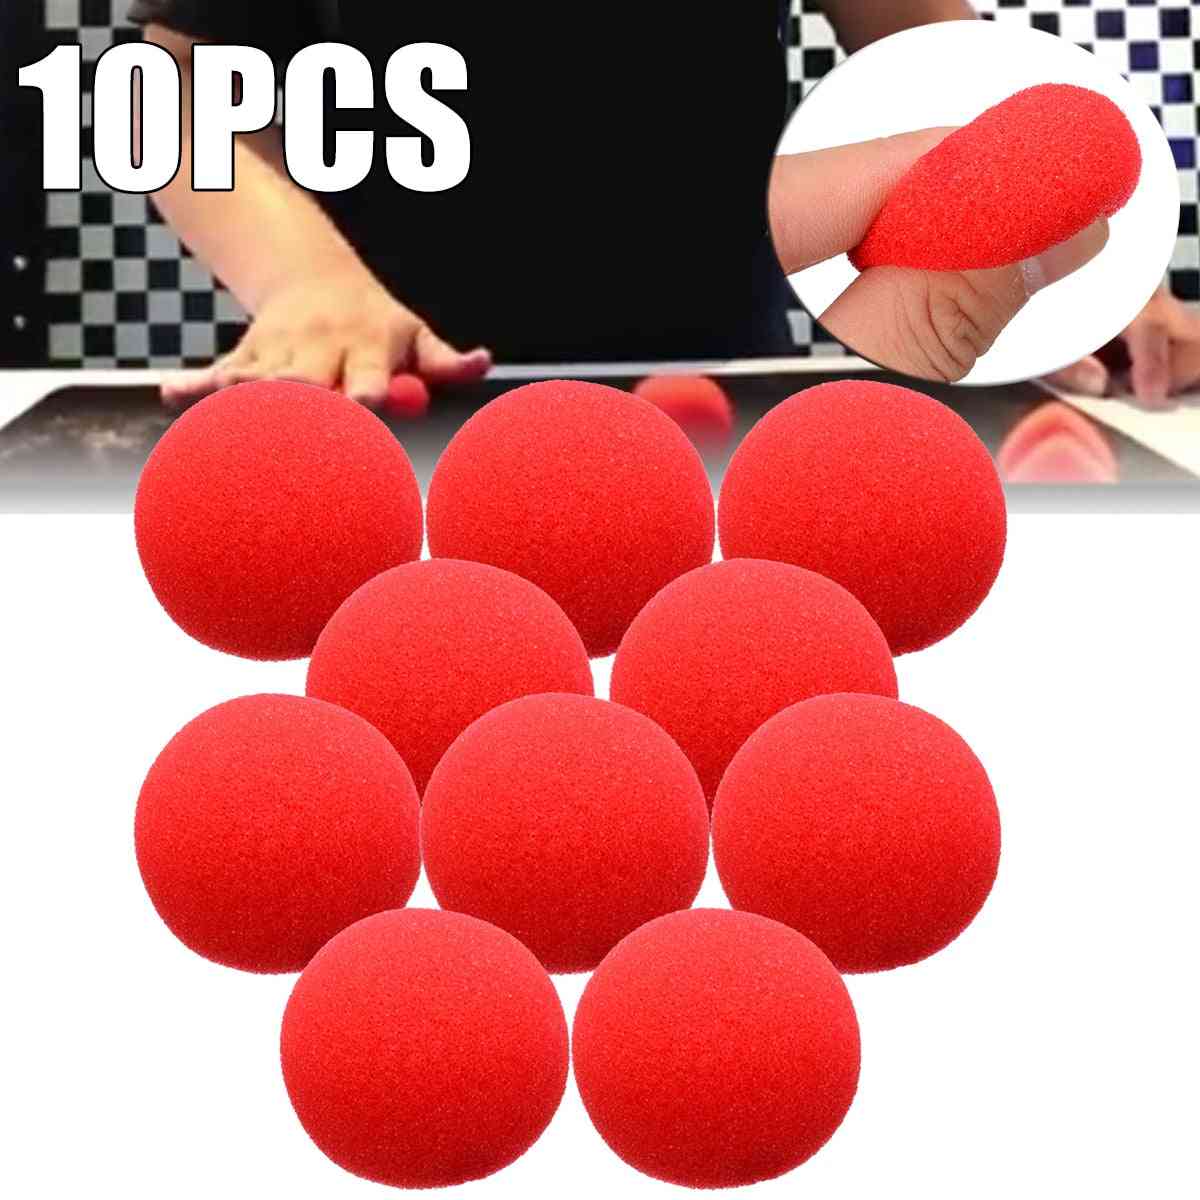 Adorable Red Ball, Super Soft Sponge Balls For Magic Party Stage Trick, Prop Clown Nose